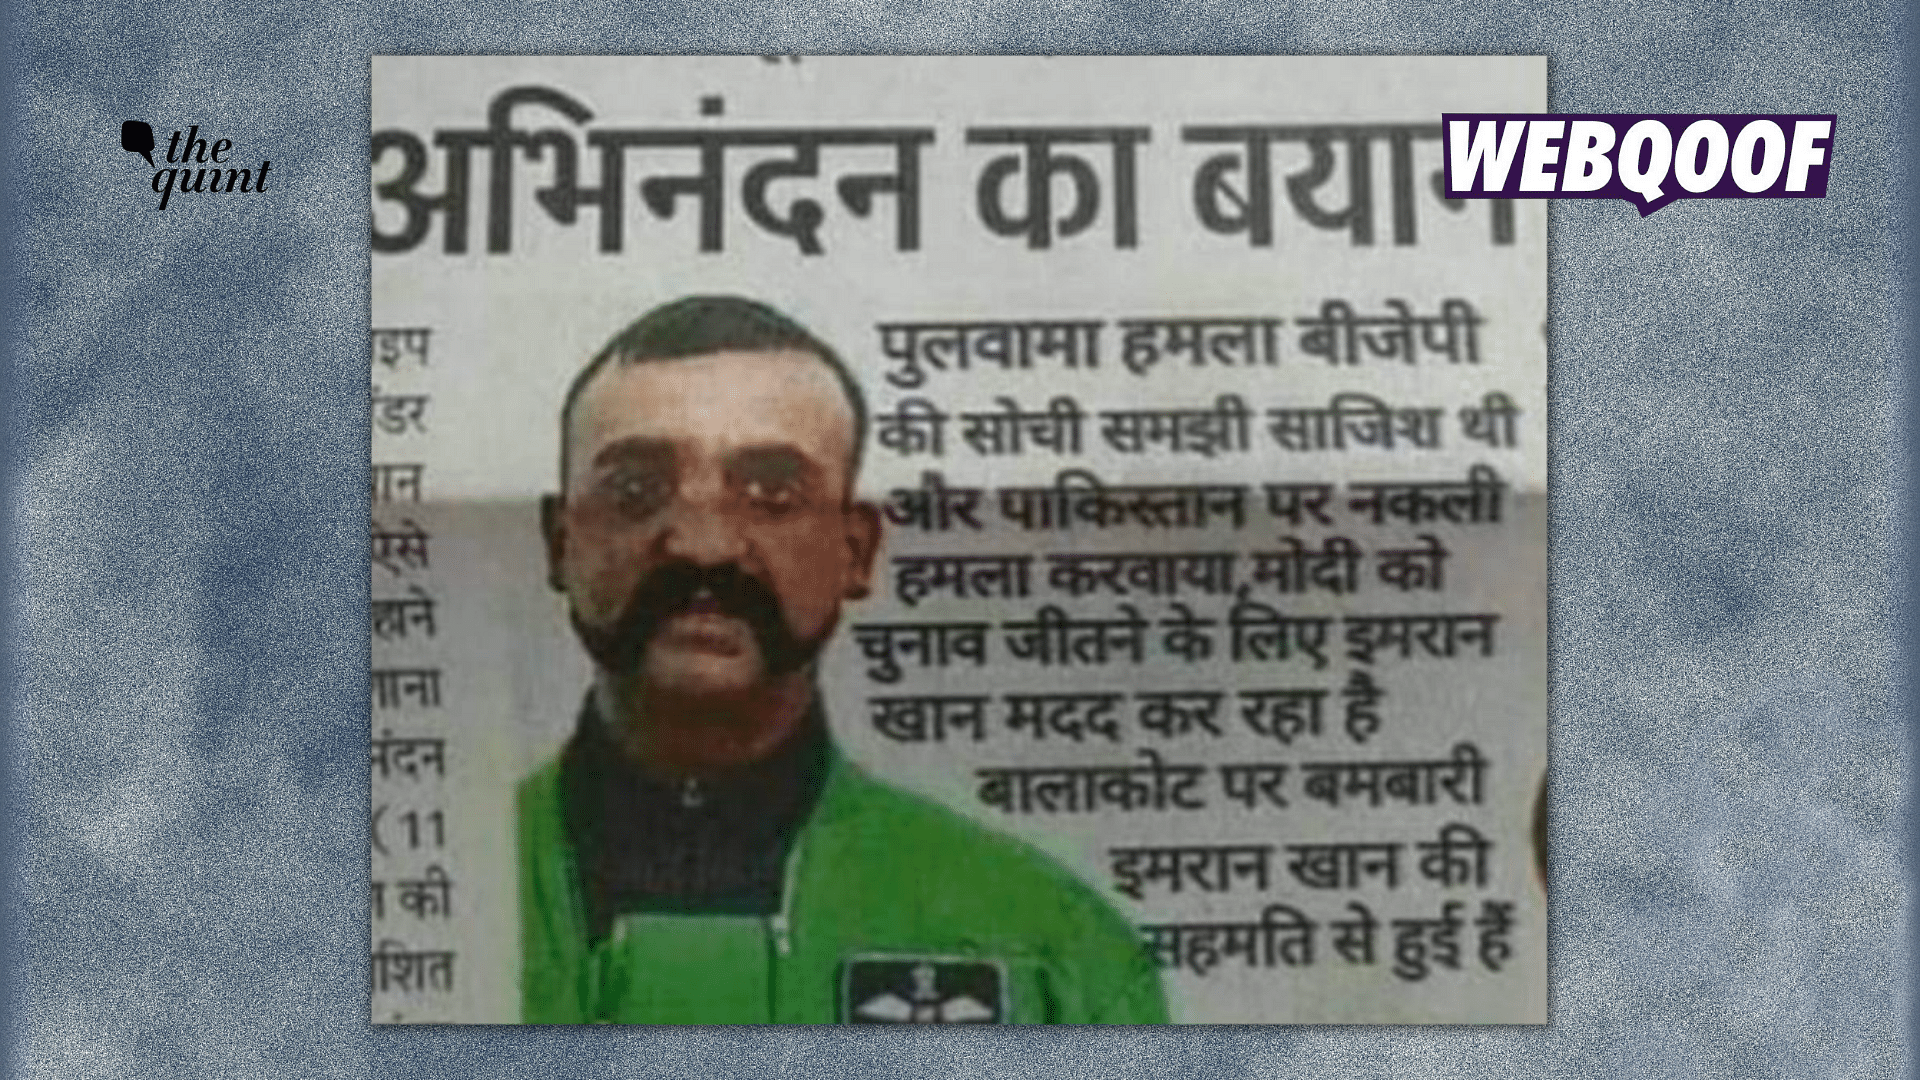 <div class="paragraphs"><p>The newspaper clipping is fabricated and Abhinandan Varthaman did not make any such statement.</p></div>